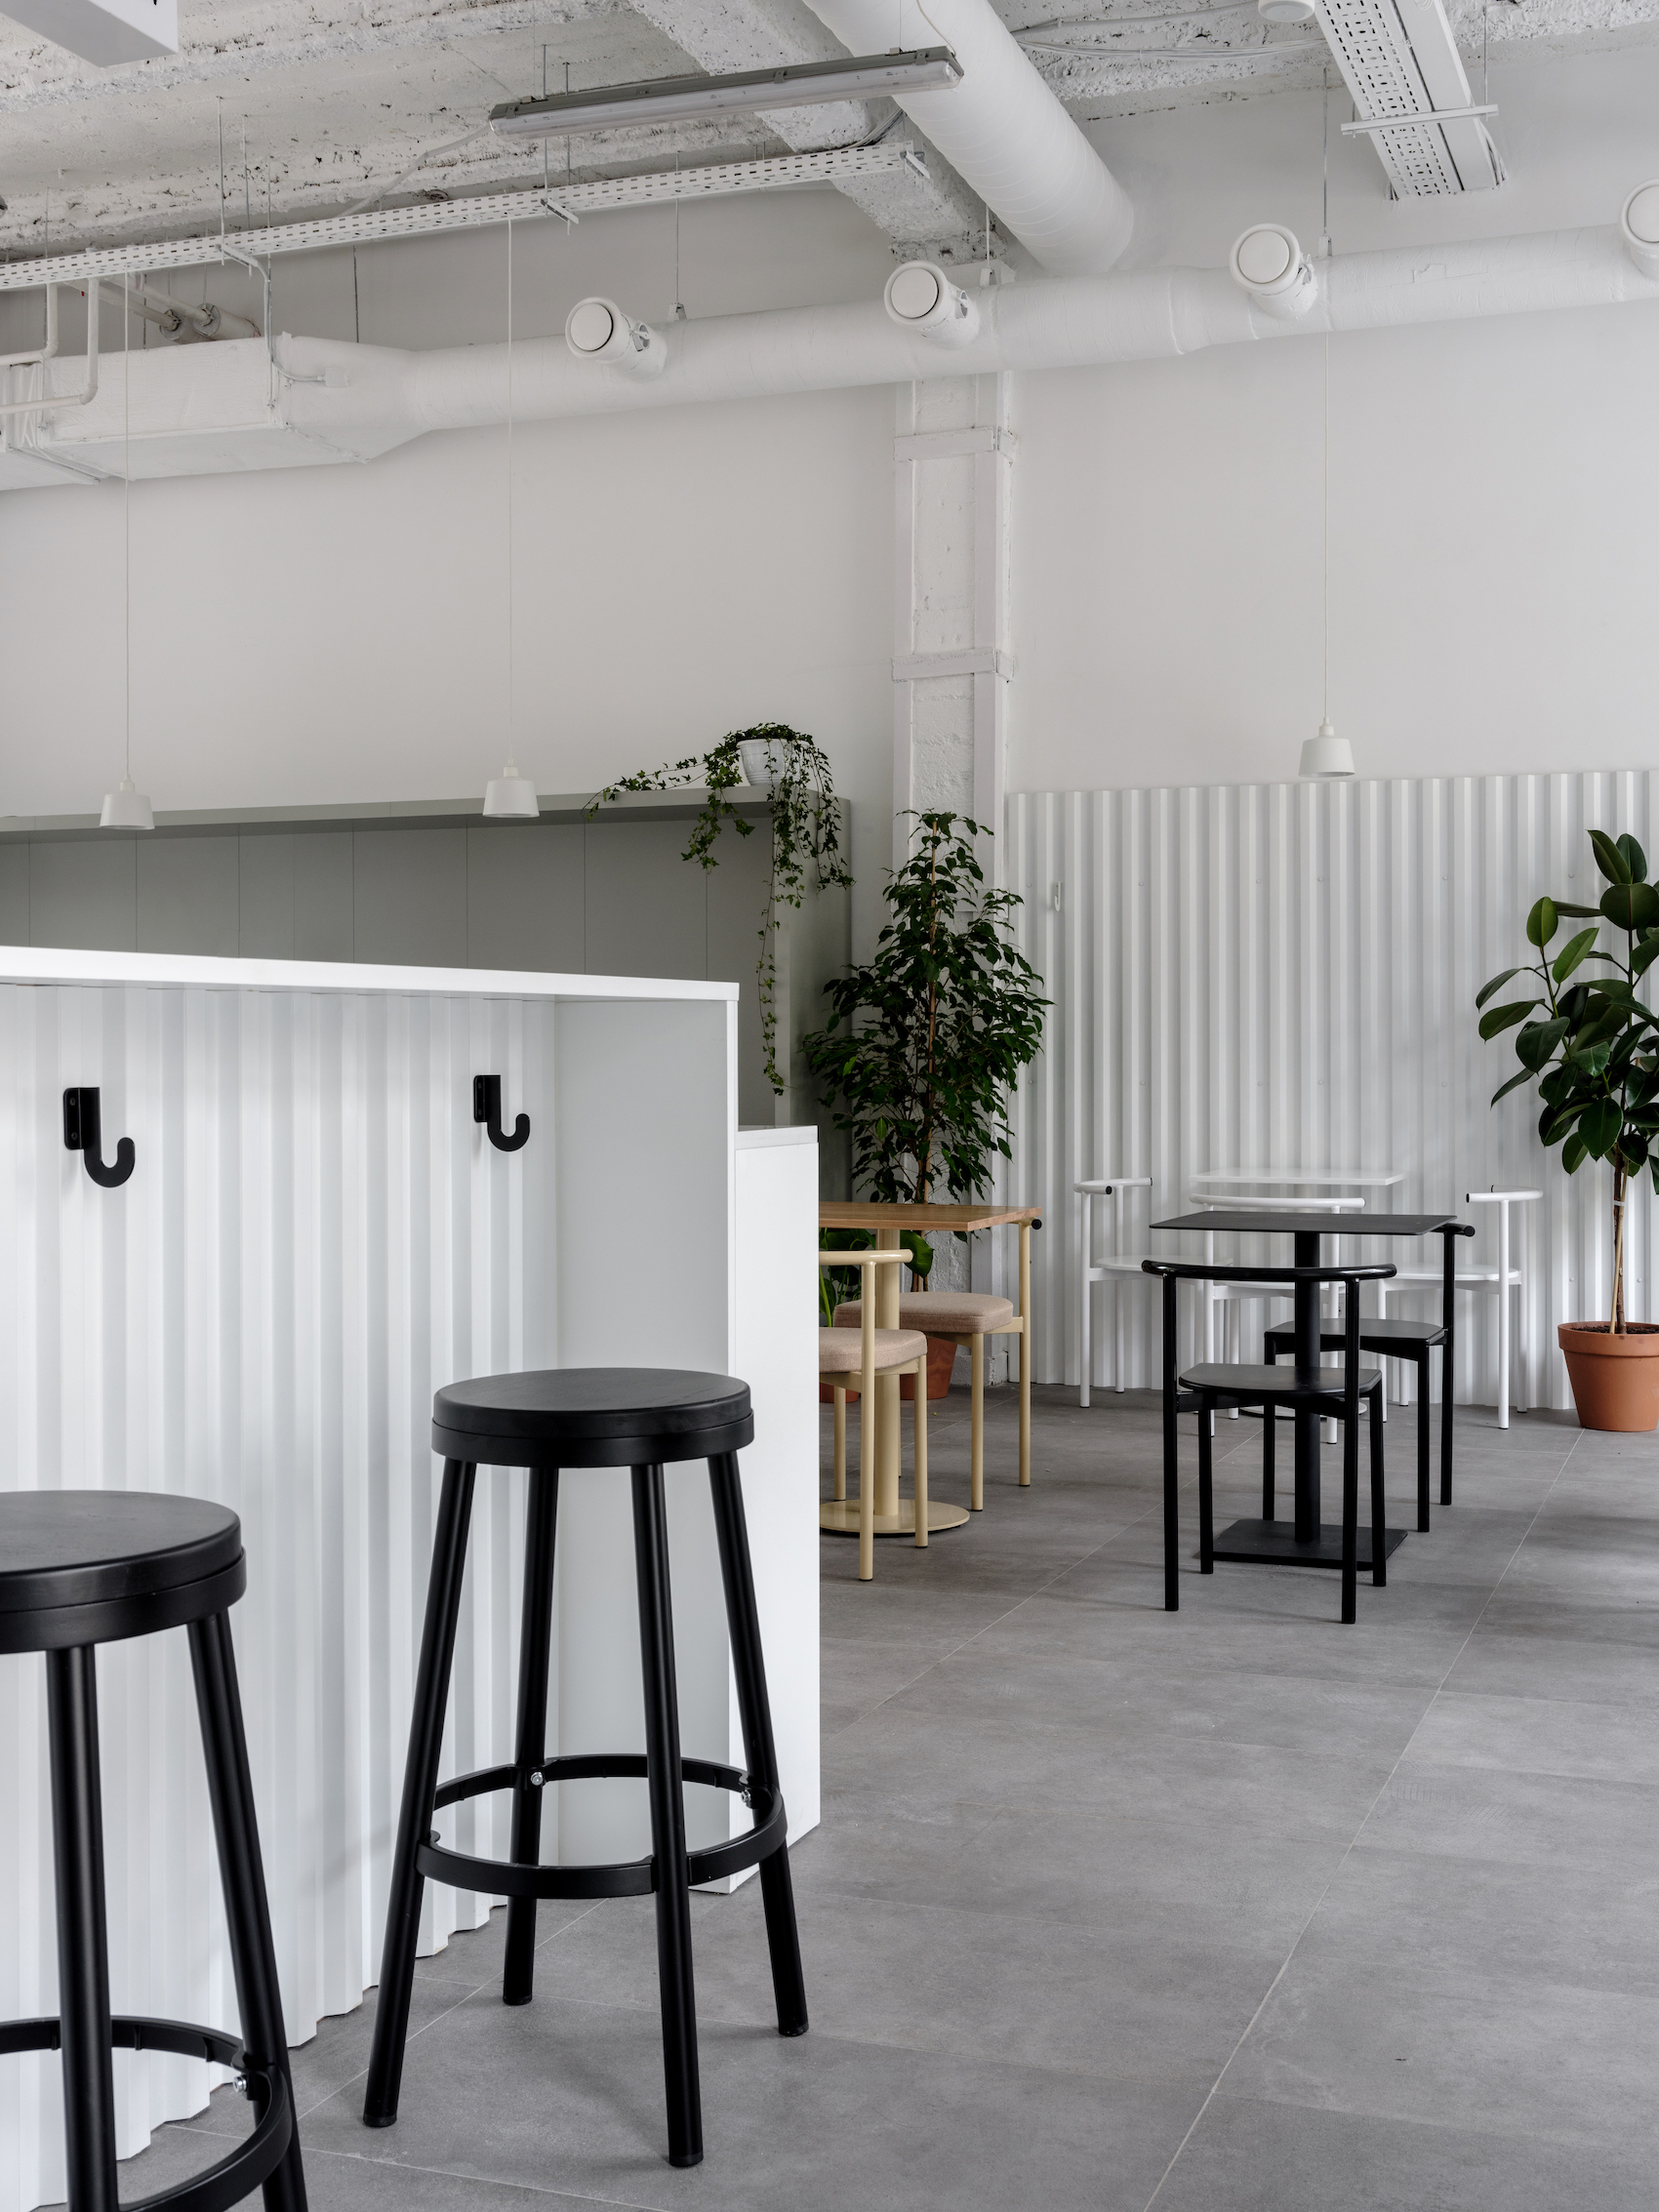 Bloom-n-Brew in Moscow, Russia by Maxim Maximov from Asketik Studio